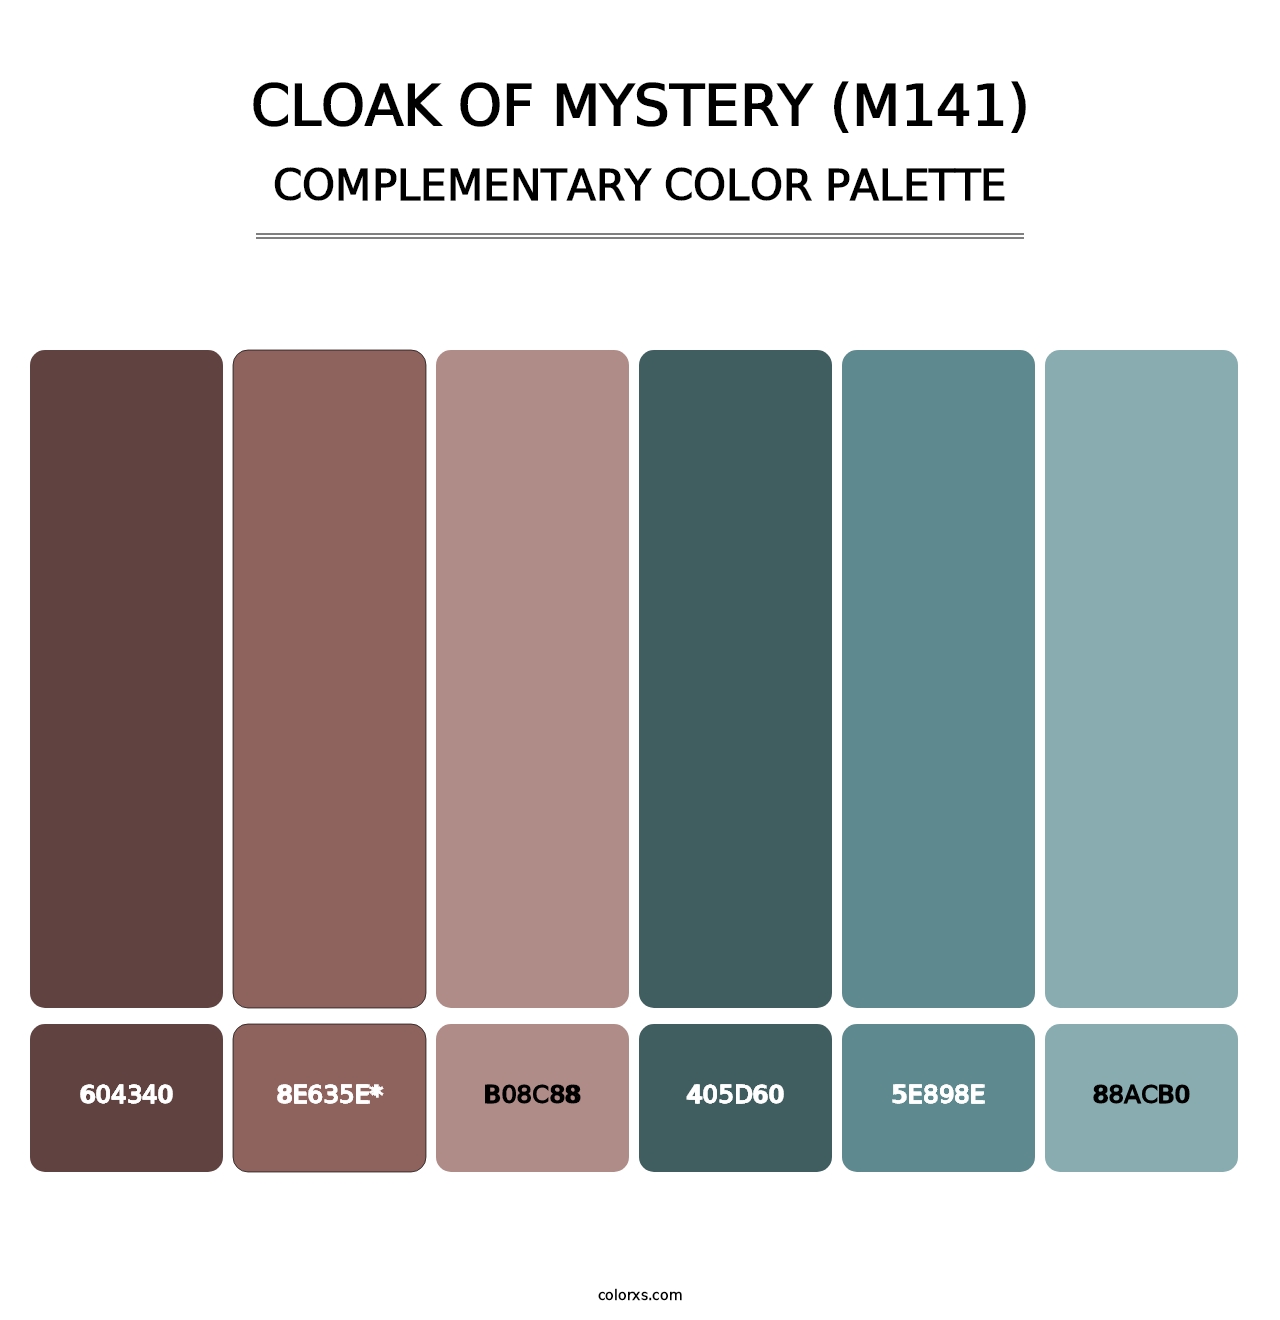 Cloak of Mystery (M141) - Complementary Color Palette